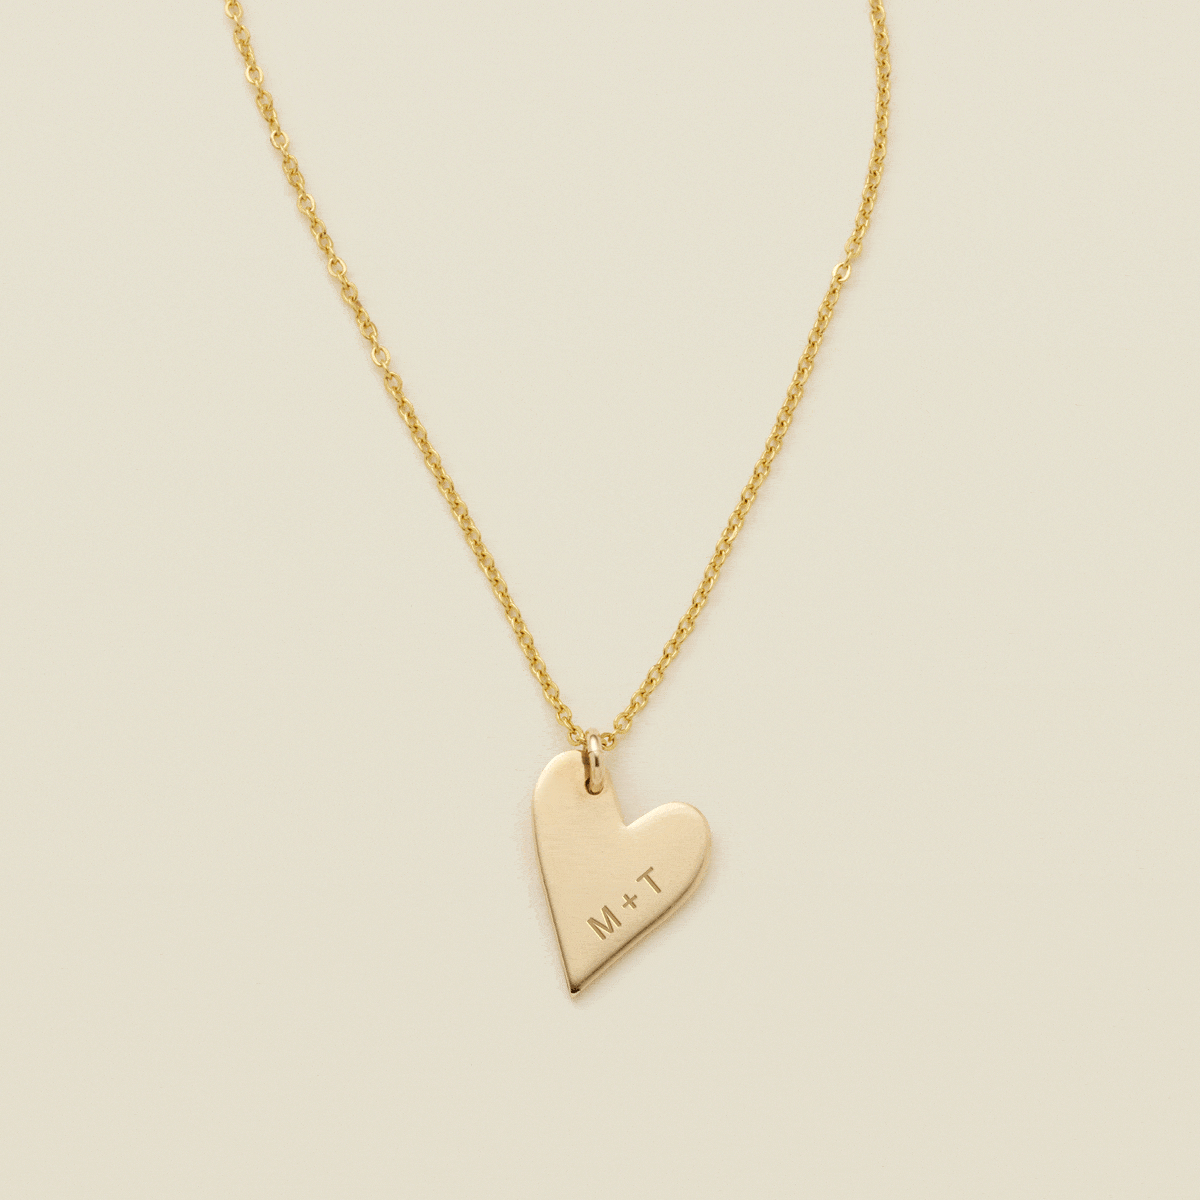  Meaningful Jewelry Gifts Double heart Necklace for 6